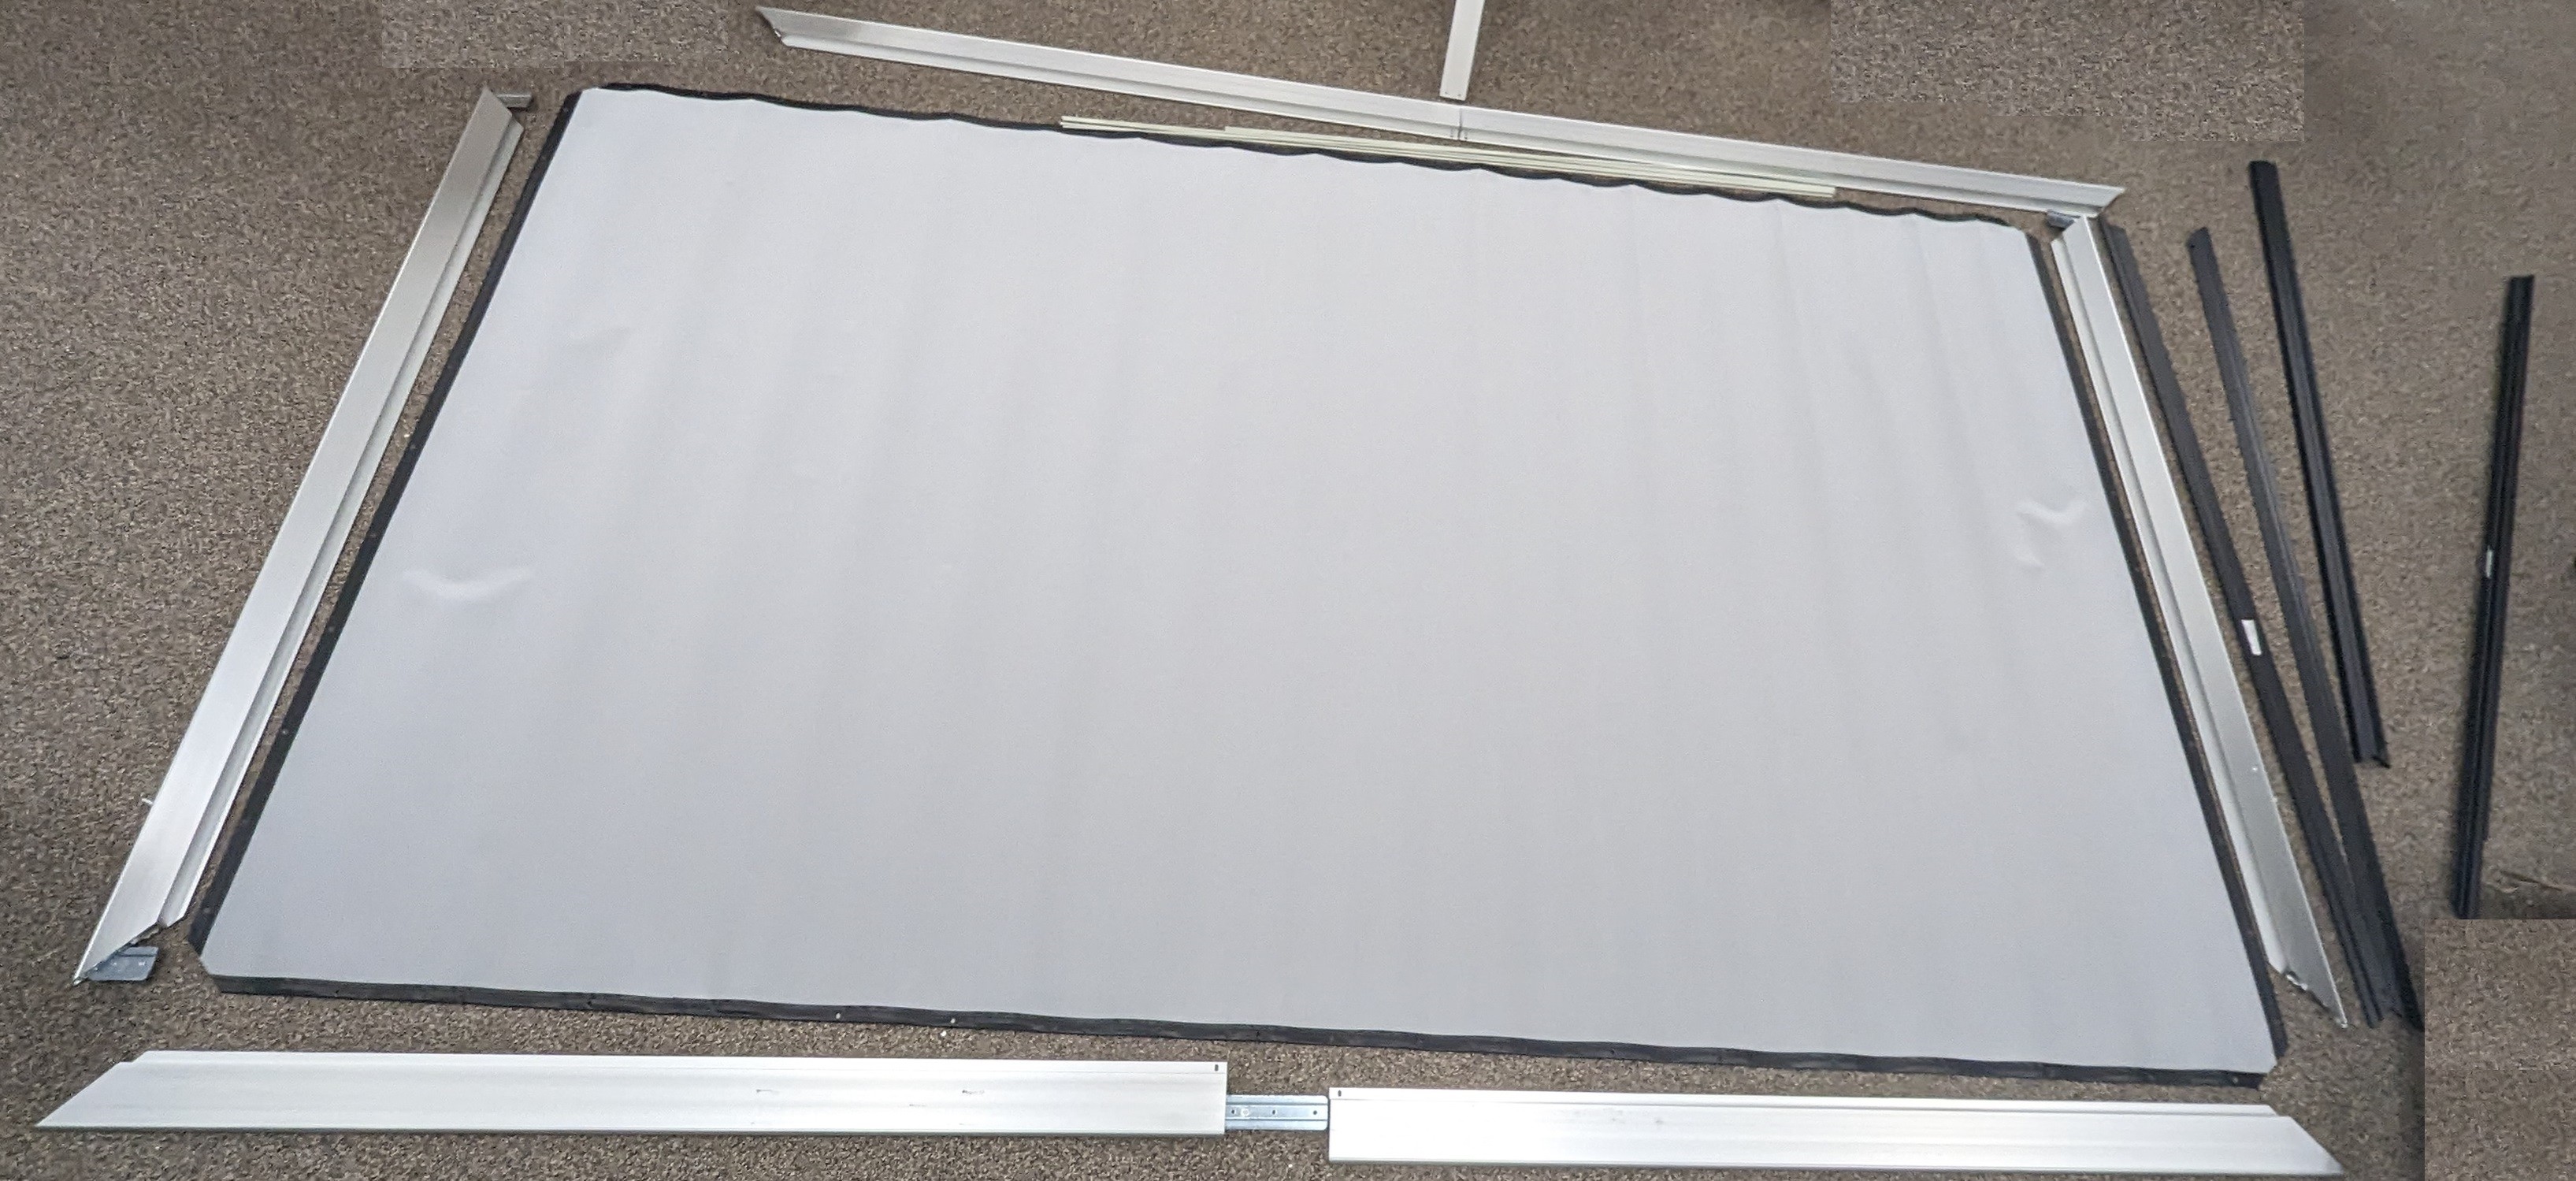 AWOL Vision ALR C-120 120" ALR Cinematic Projector Screen - Read - Missing parts